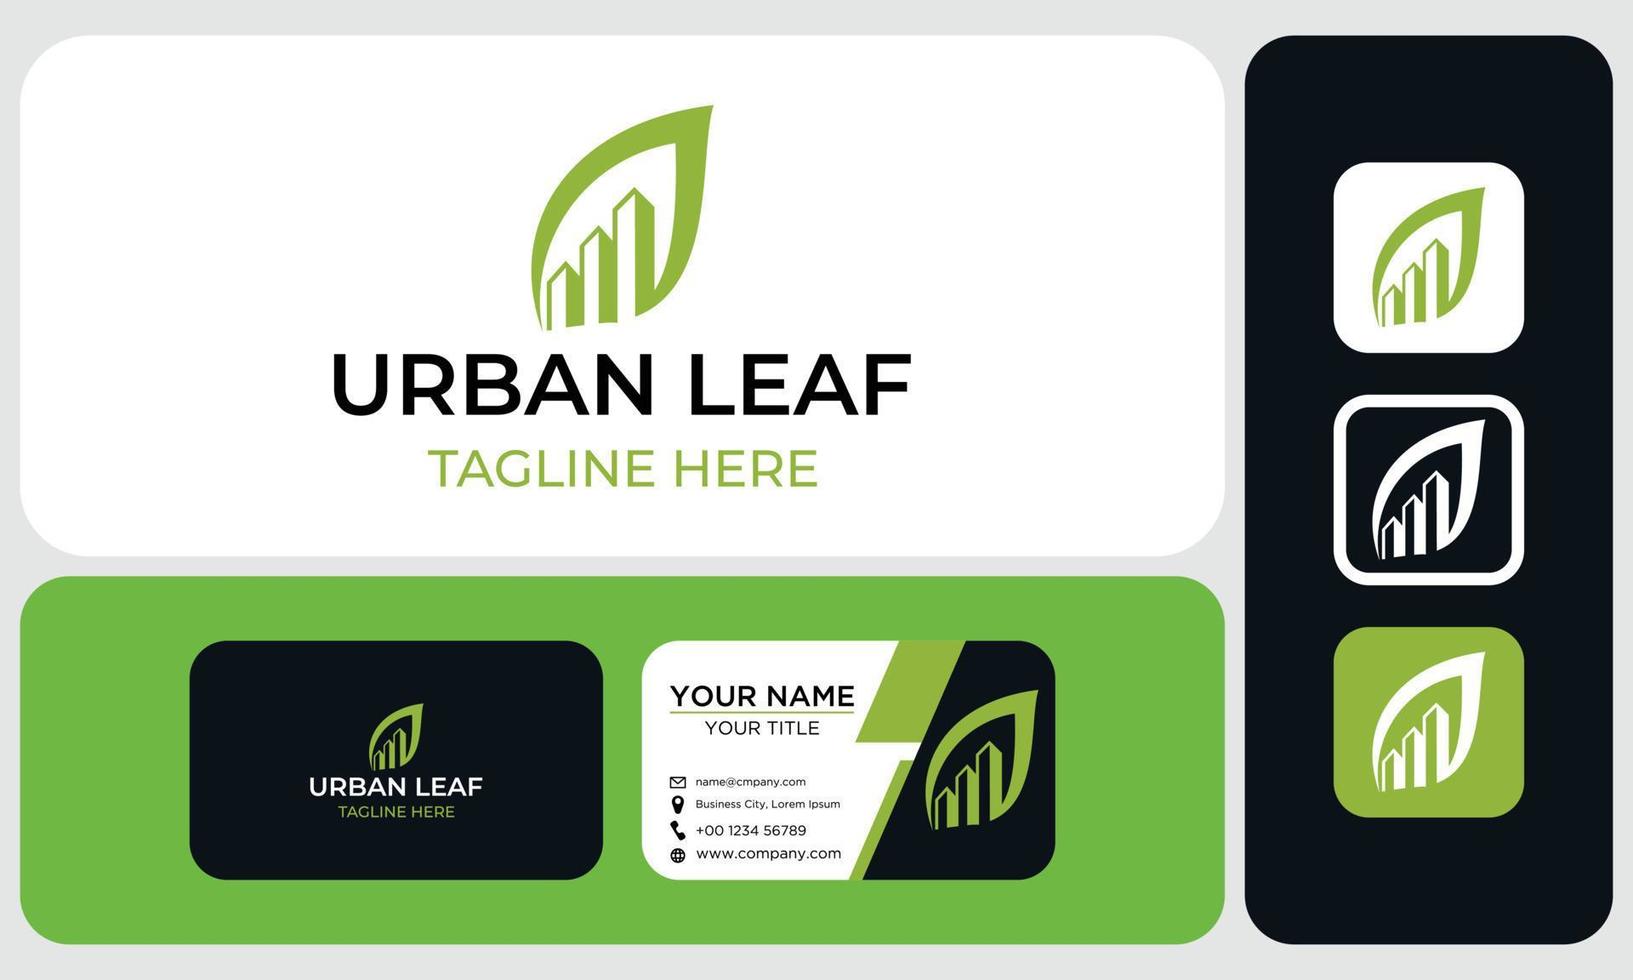 Package of business card and logo design. Green leaf with green city buildings silhouette. Vector logo template. Abstract design concept for ecology theme, real estate agency, building company.